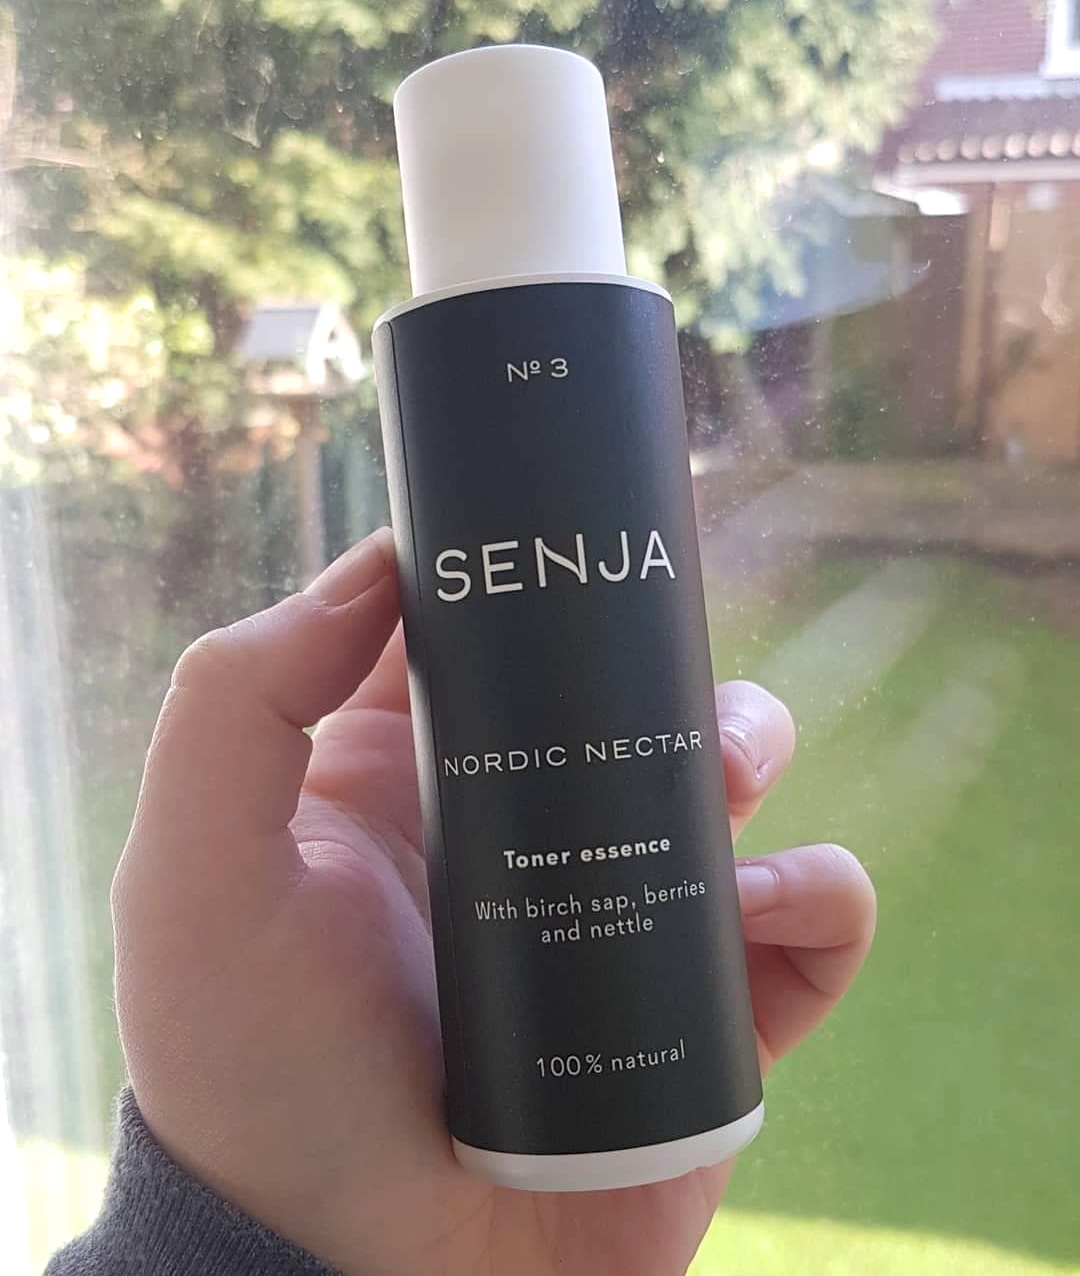 Nordic Nectar Toner from Finnish green beauty brand Senja held up in a hand in front of a window